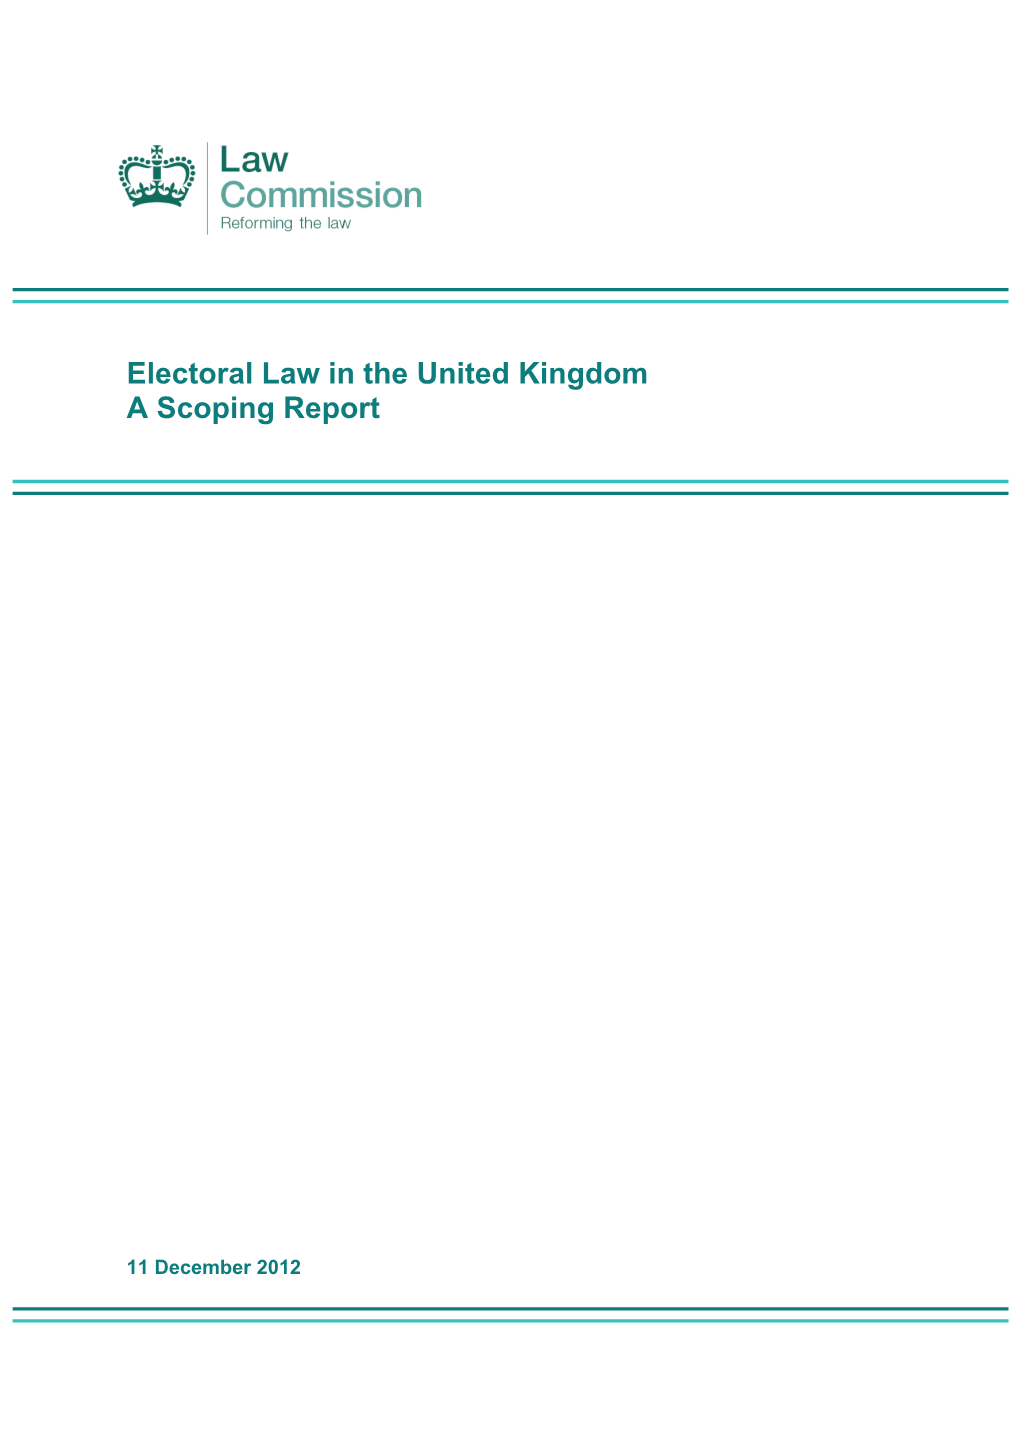 Electoral Law in the United Kingdom a Scoping Report